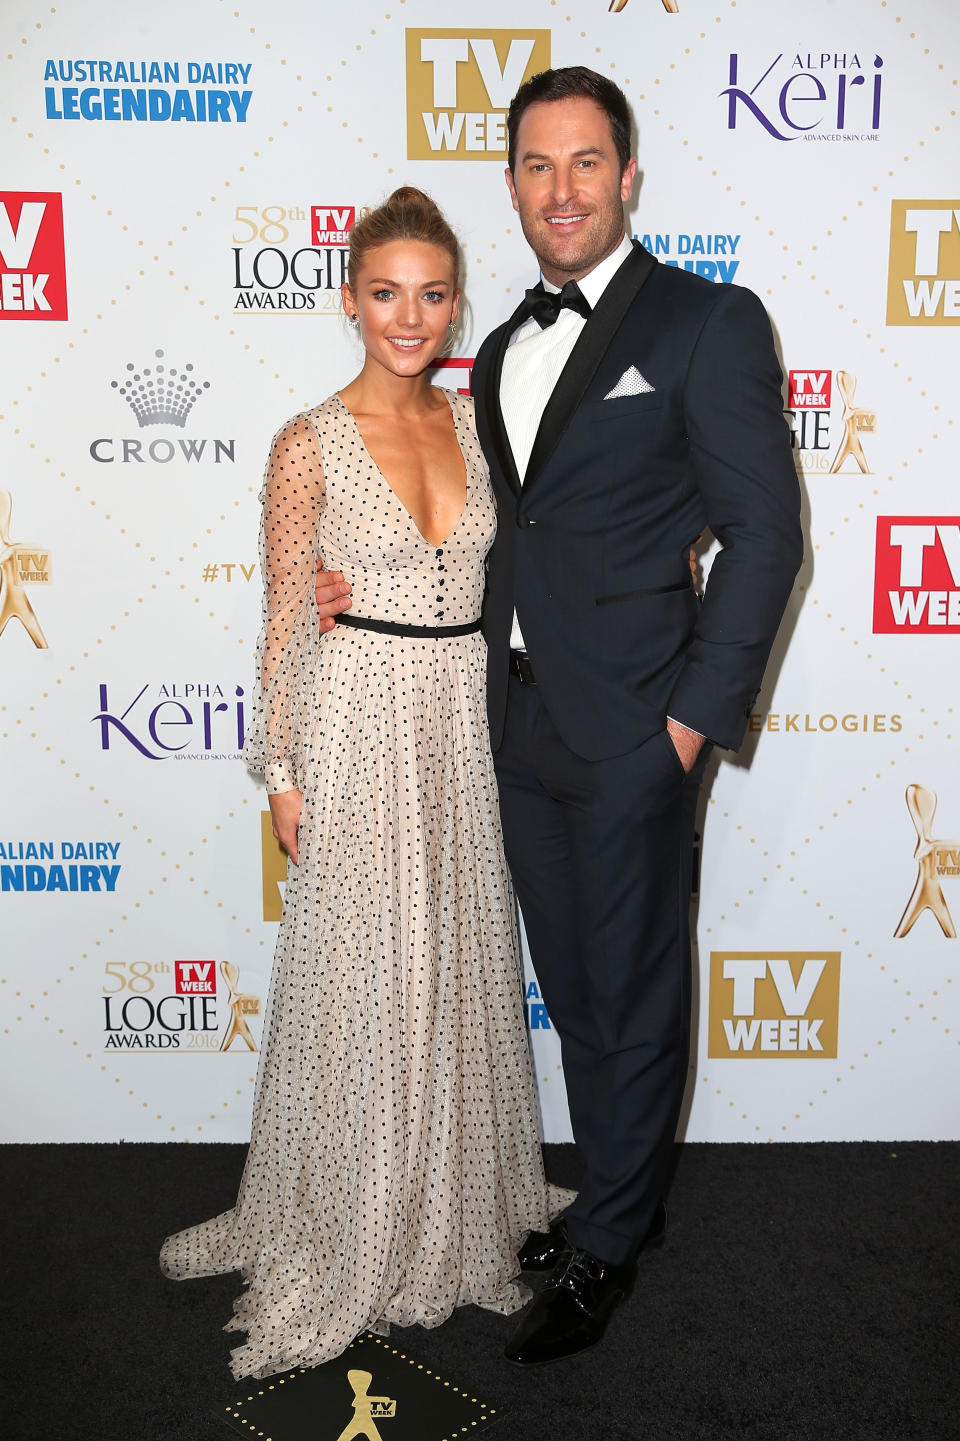 Sam and Sasha at the Logies in 2016 before their breakup. They were together for 18 months. Source: Getty